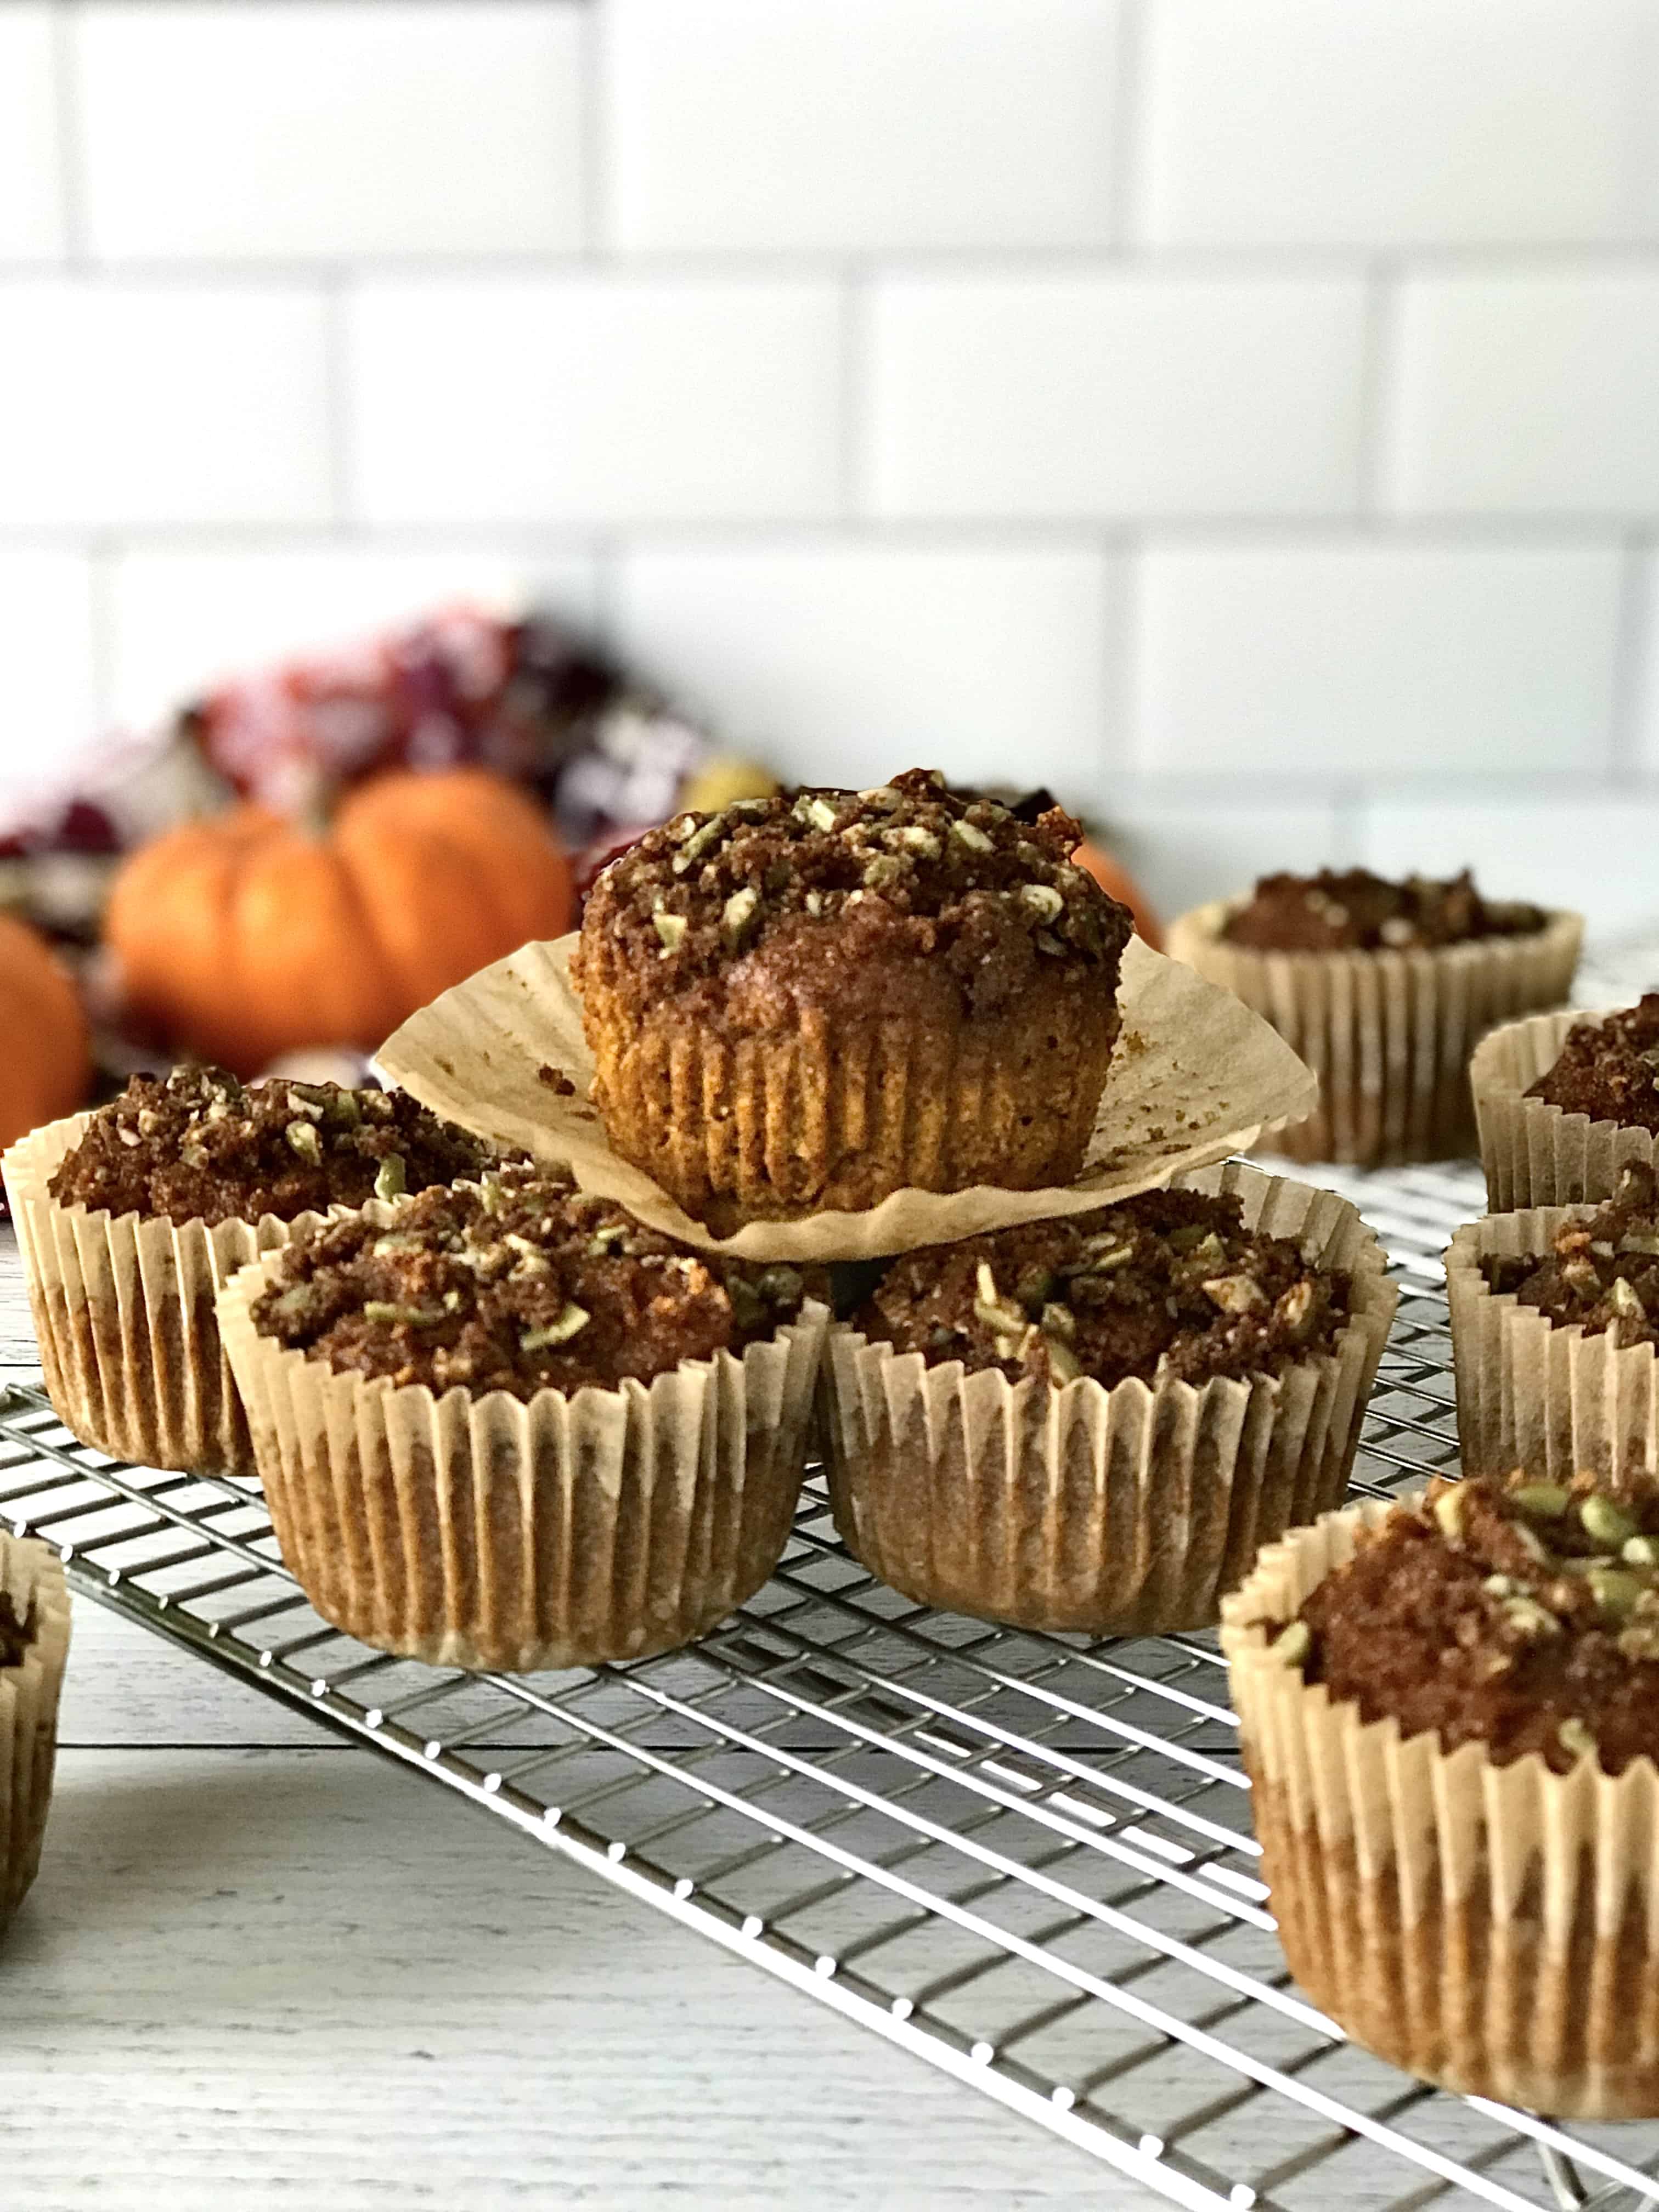 gluten-free pumpkin muffins in their brown muffin cups on a wire cooling rack.